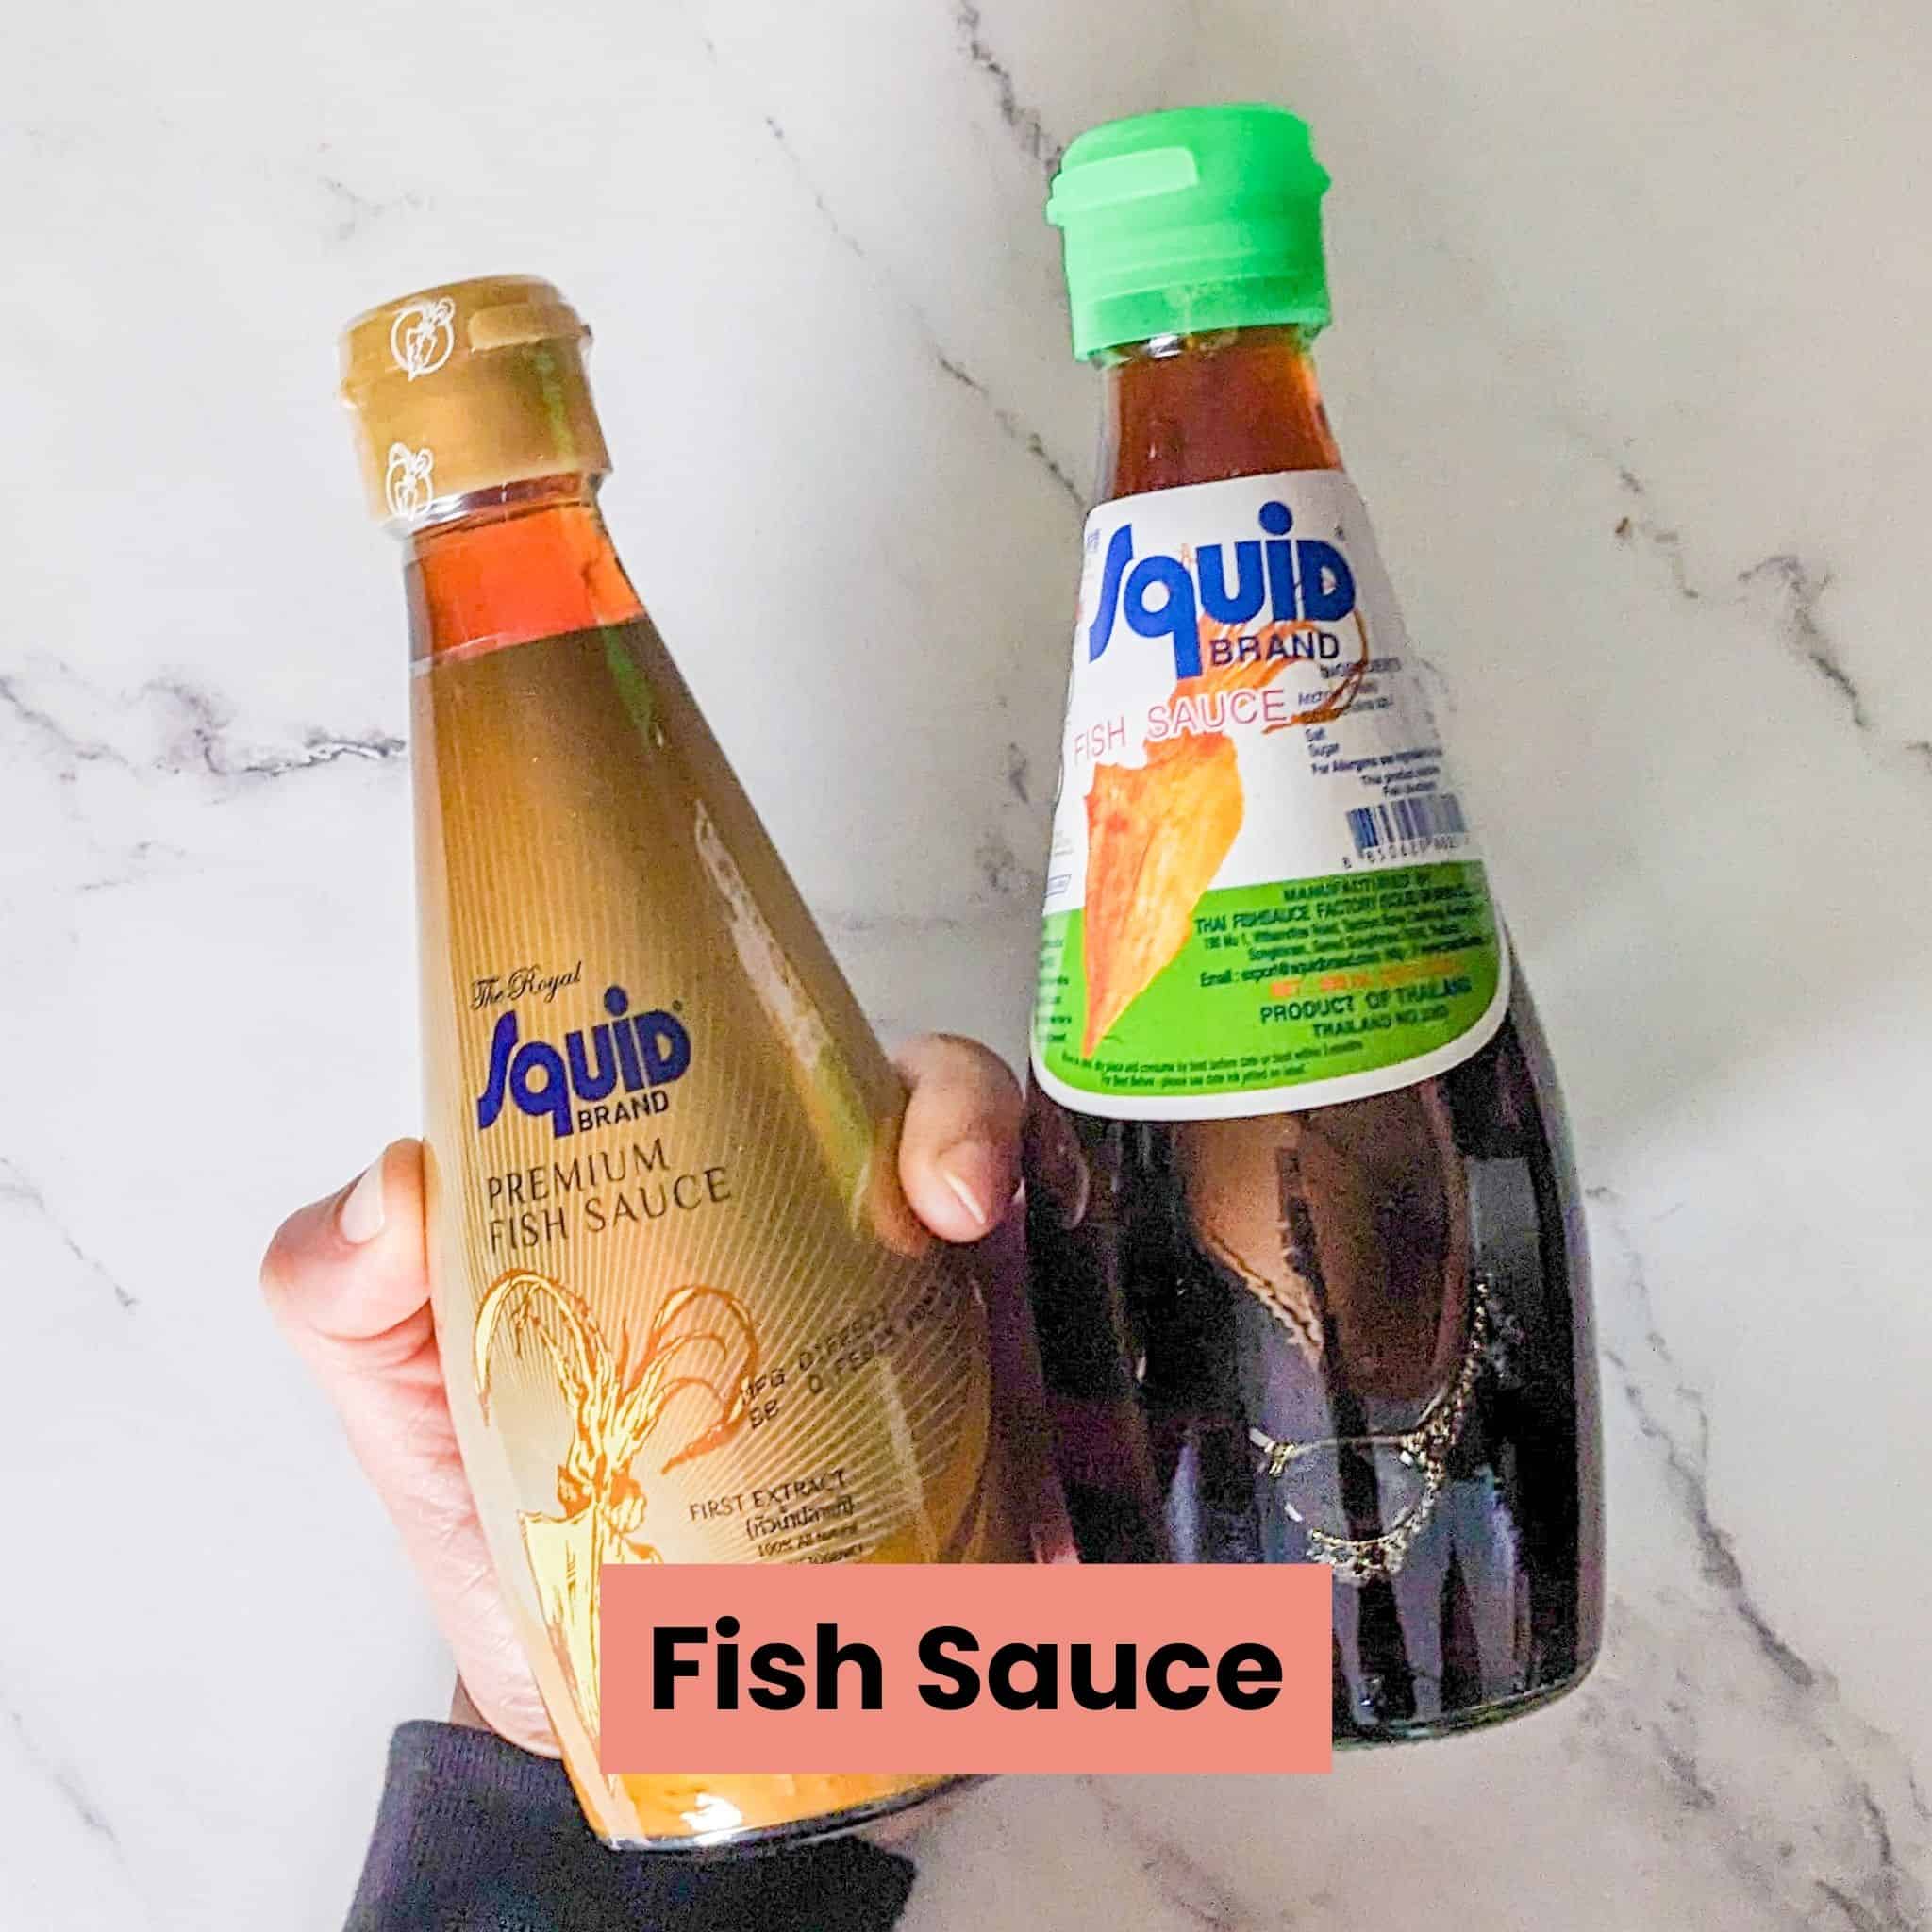 hand holding to of Squid Brand fish sauce product, on the left "Squid Brand Premium Fish Sauce" and on the right "Squid Brand Fish Sauce" the original.